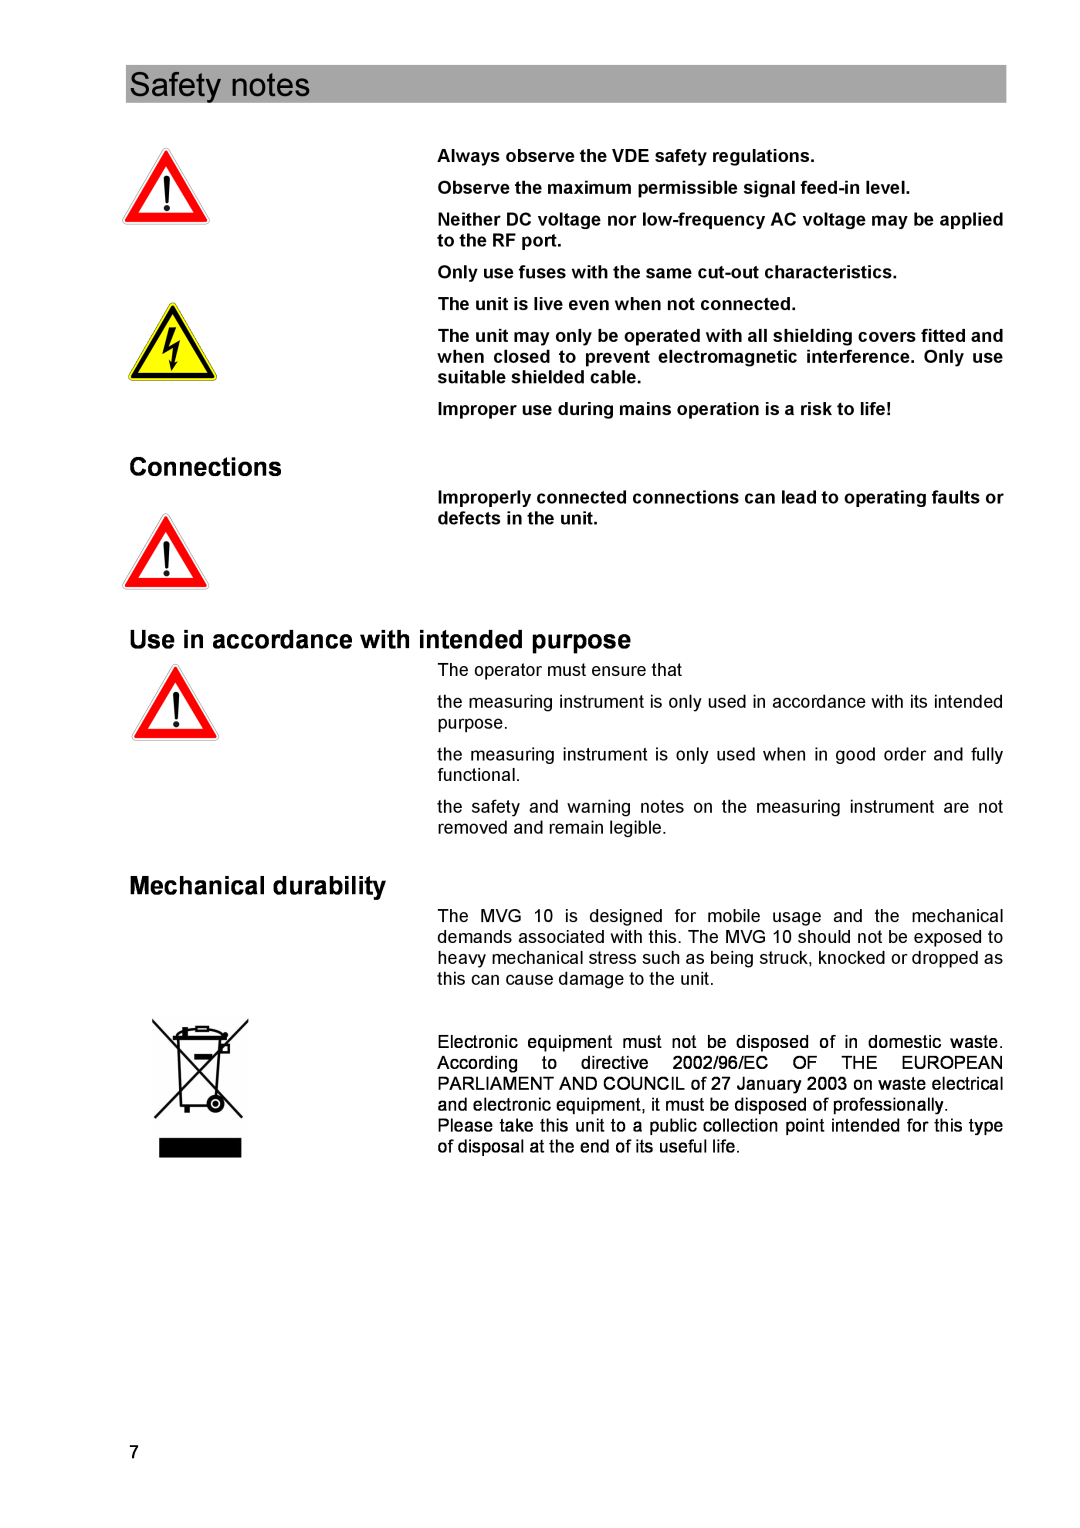 Kathrein MVG 10 manual Connections, Use in accordance with intended purpose, Mechanical durability, Safety notes 